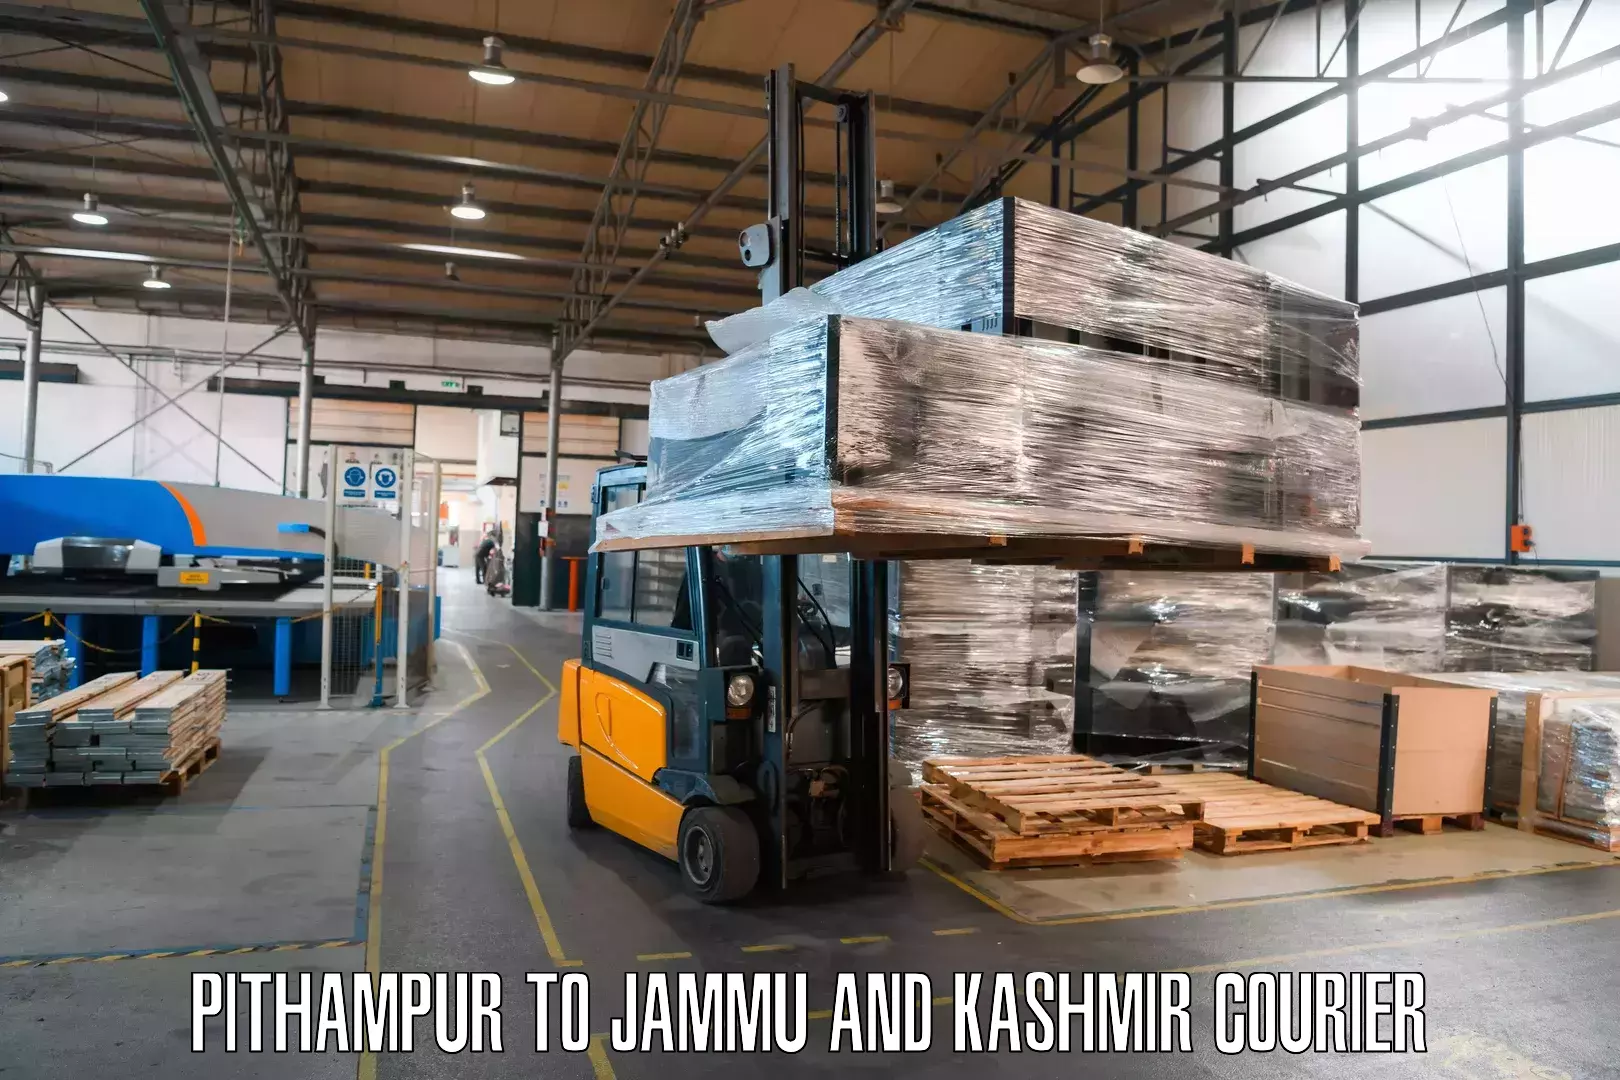 Parcel handling and care Pithampur to Baramulla